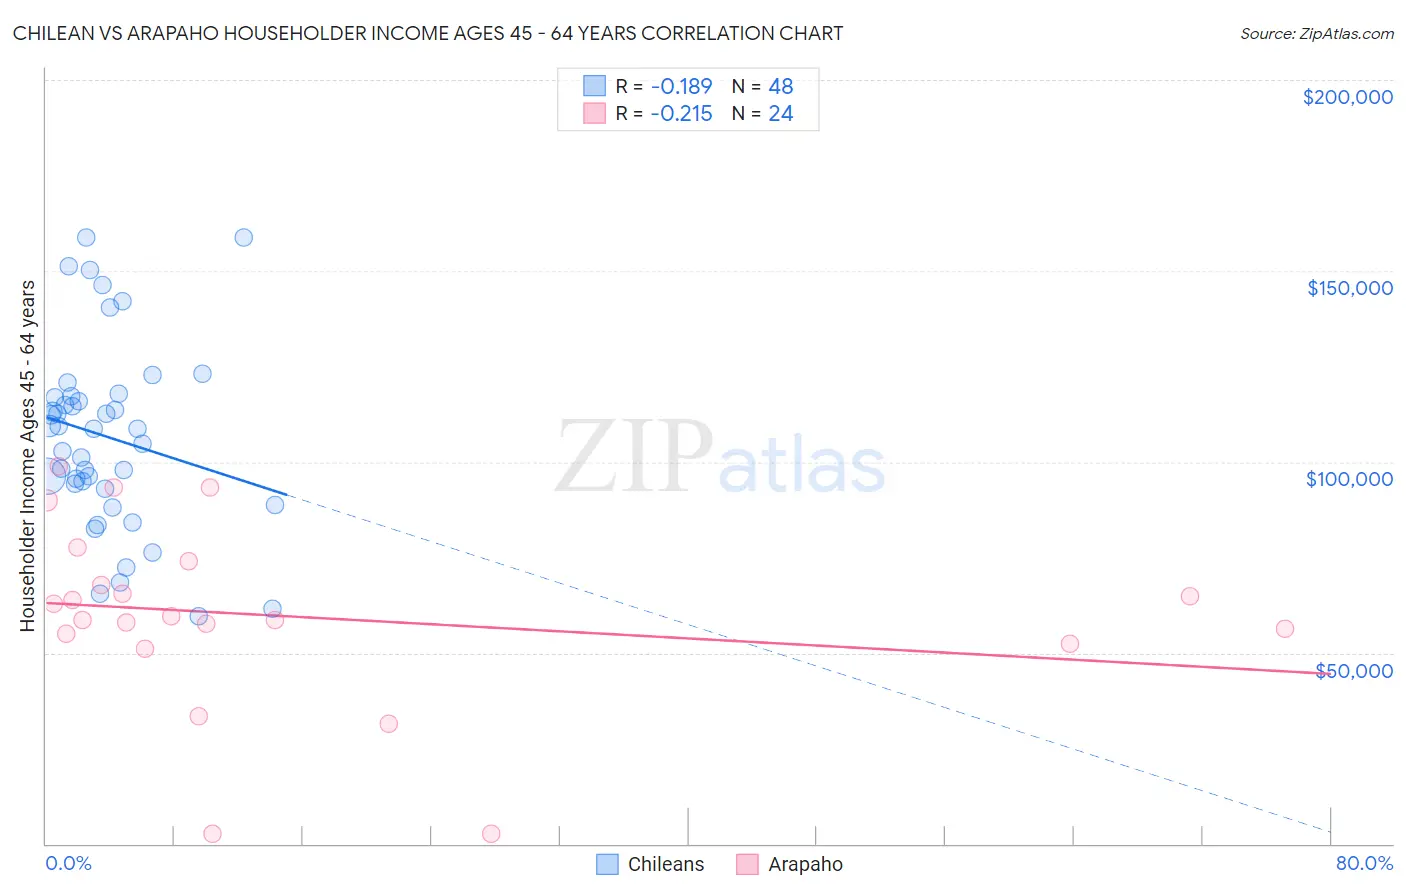 Chilean vs Arapaho Householder Income Ages 45 - 64 years